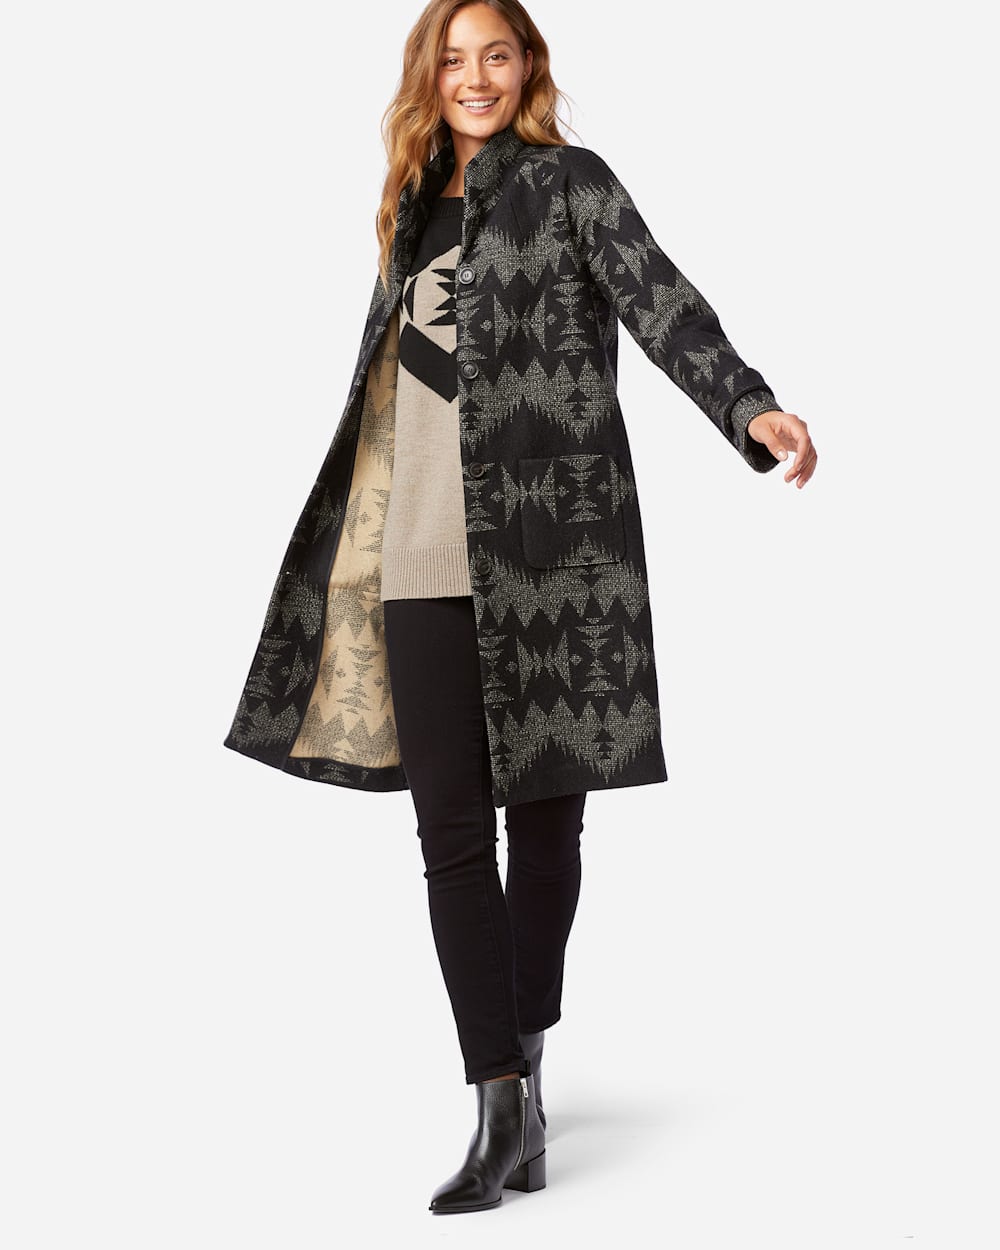 ALTERNATE VIEW OF WOMEN'S SONORA ARCHIVE BLANKET COAT IN BLACK SONORA image number 2